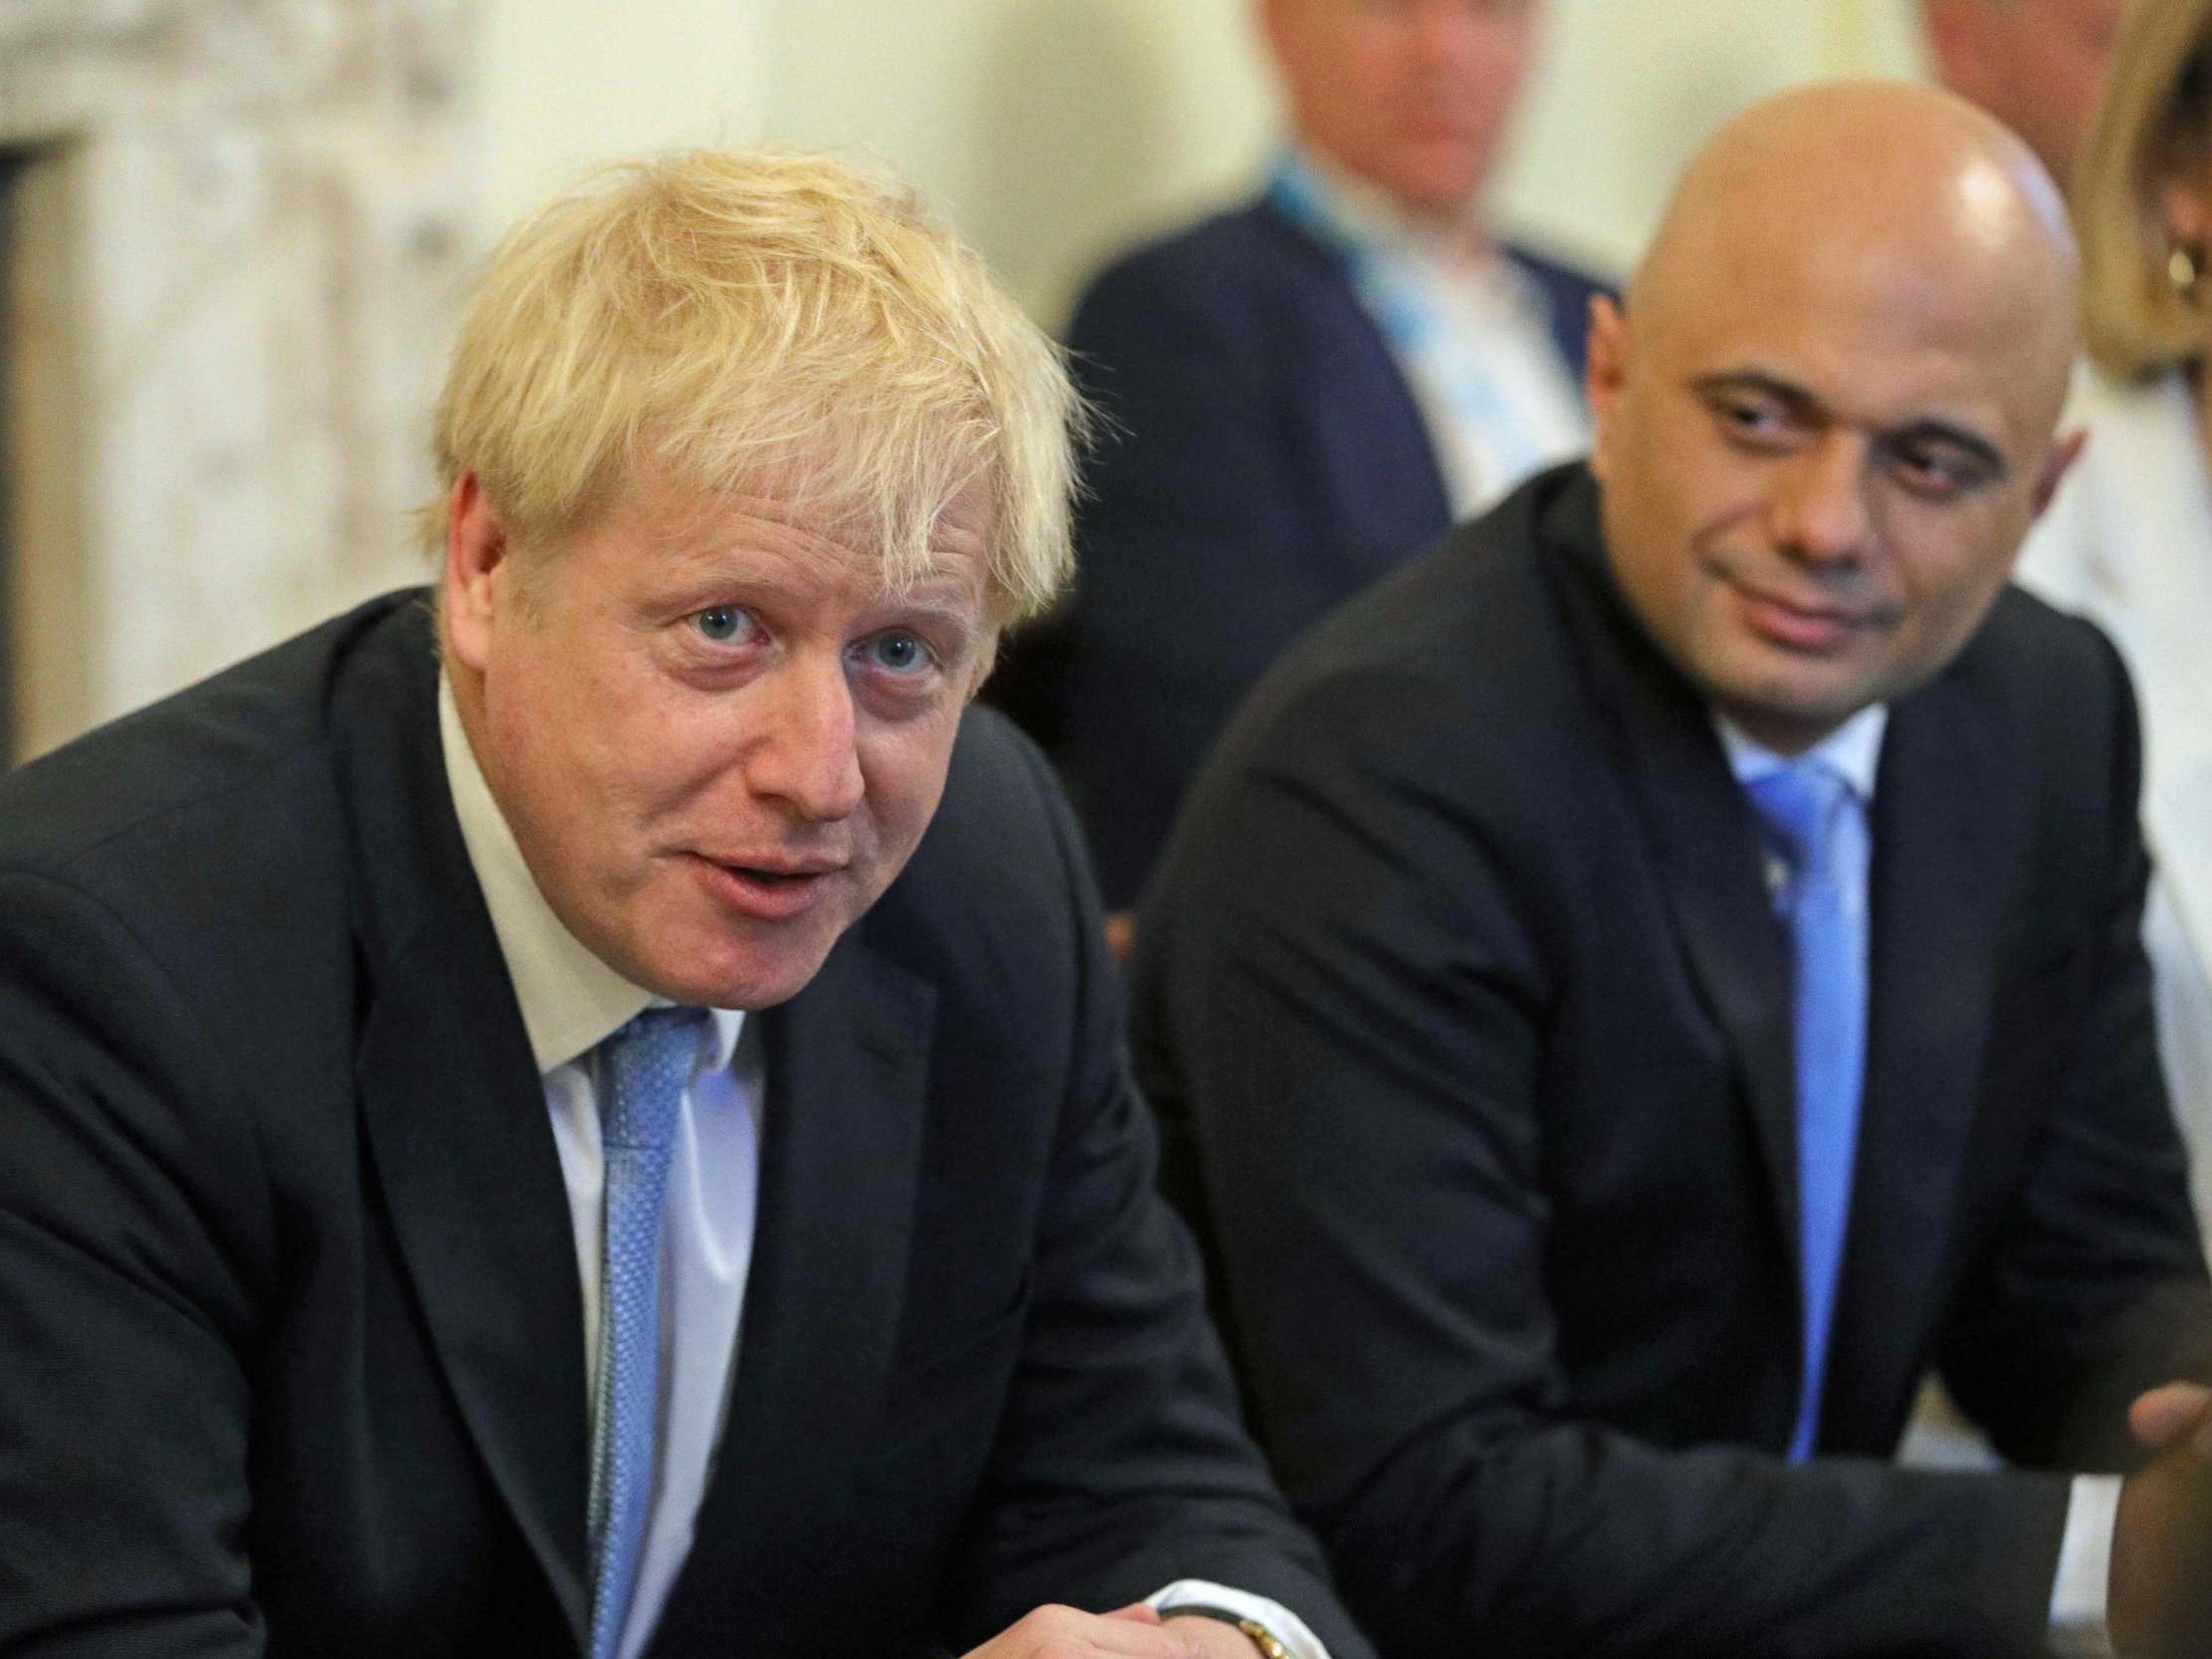 Mr Johnson's new home secretary Priti Patel will find it difficult to follow Sajid Javid, who won over police officers